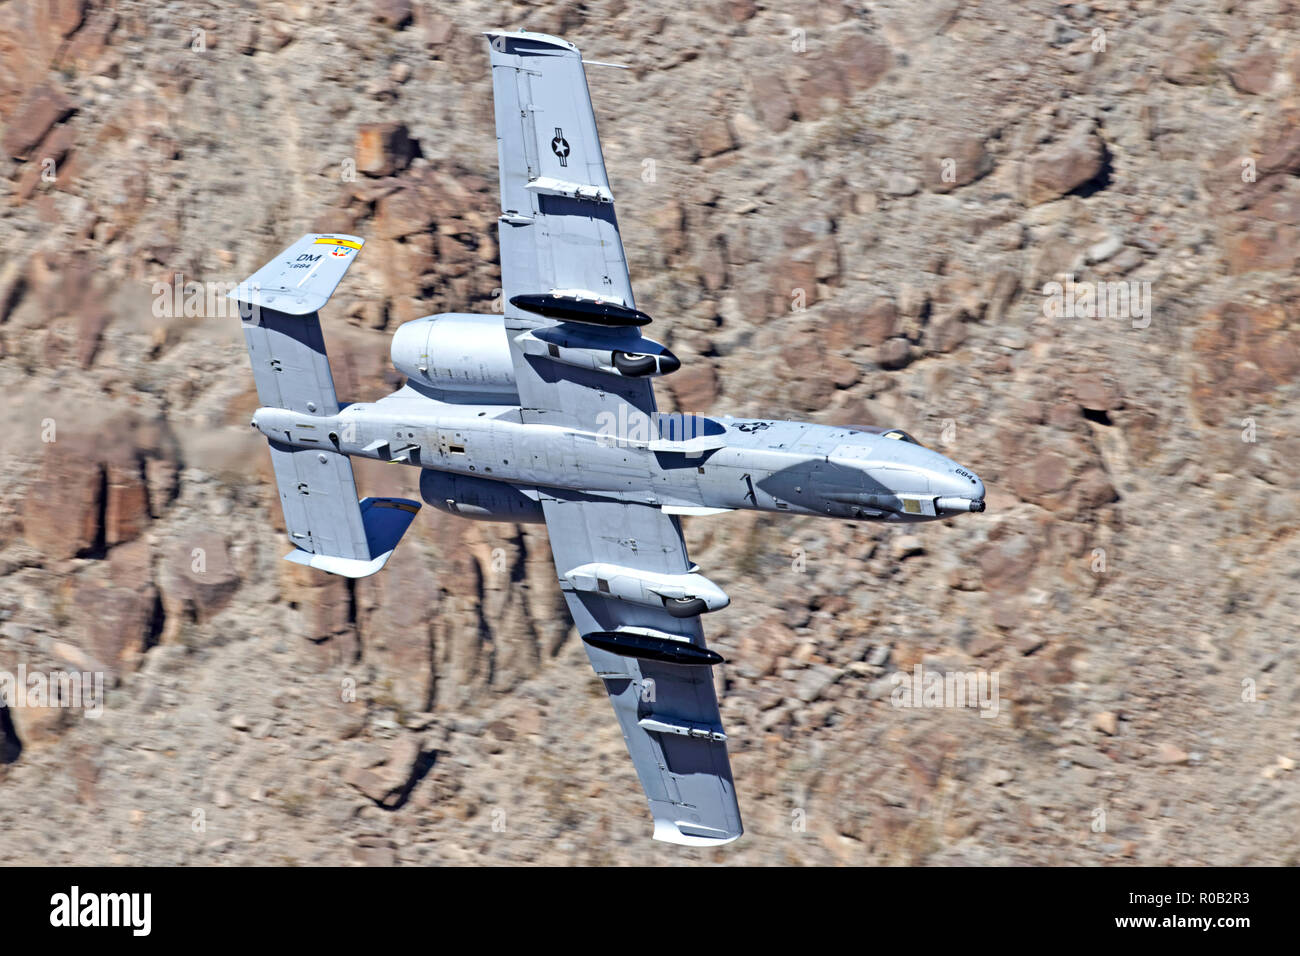 Fairchild A-10C Thunderbolt II flown by US Air Force A10 Demonstration Team from the 355th FW based at Davis Monthan AFB in Death Valley during 2018 Stock Photo